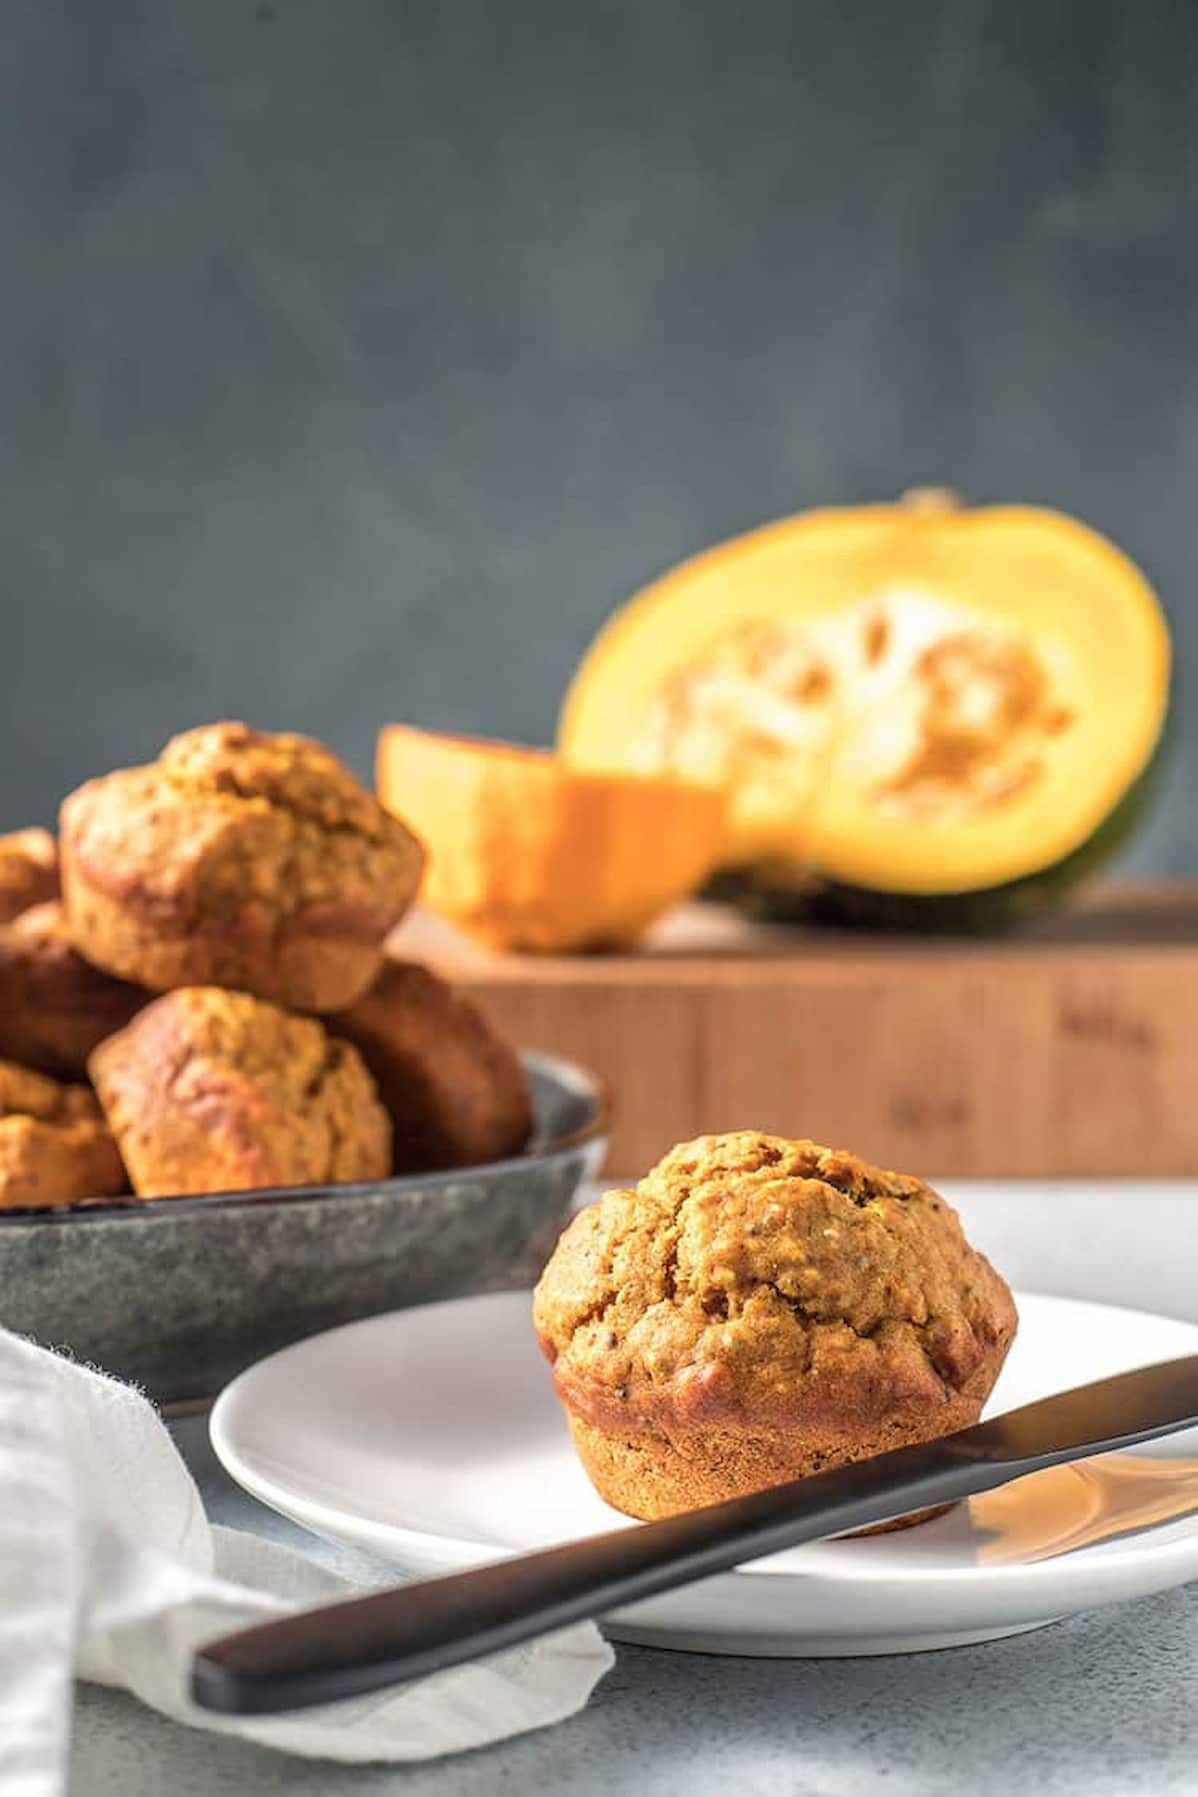 Orange pumpkin muffin on a plate with more muffins a sliced pumpkin in the background.